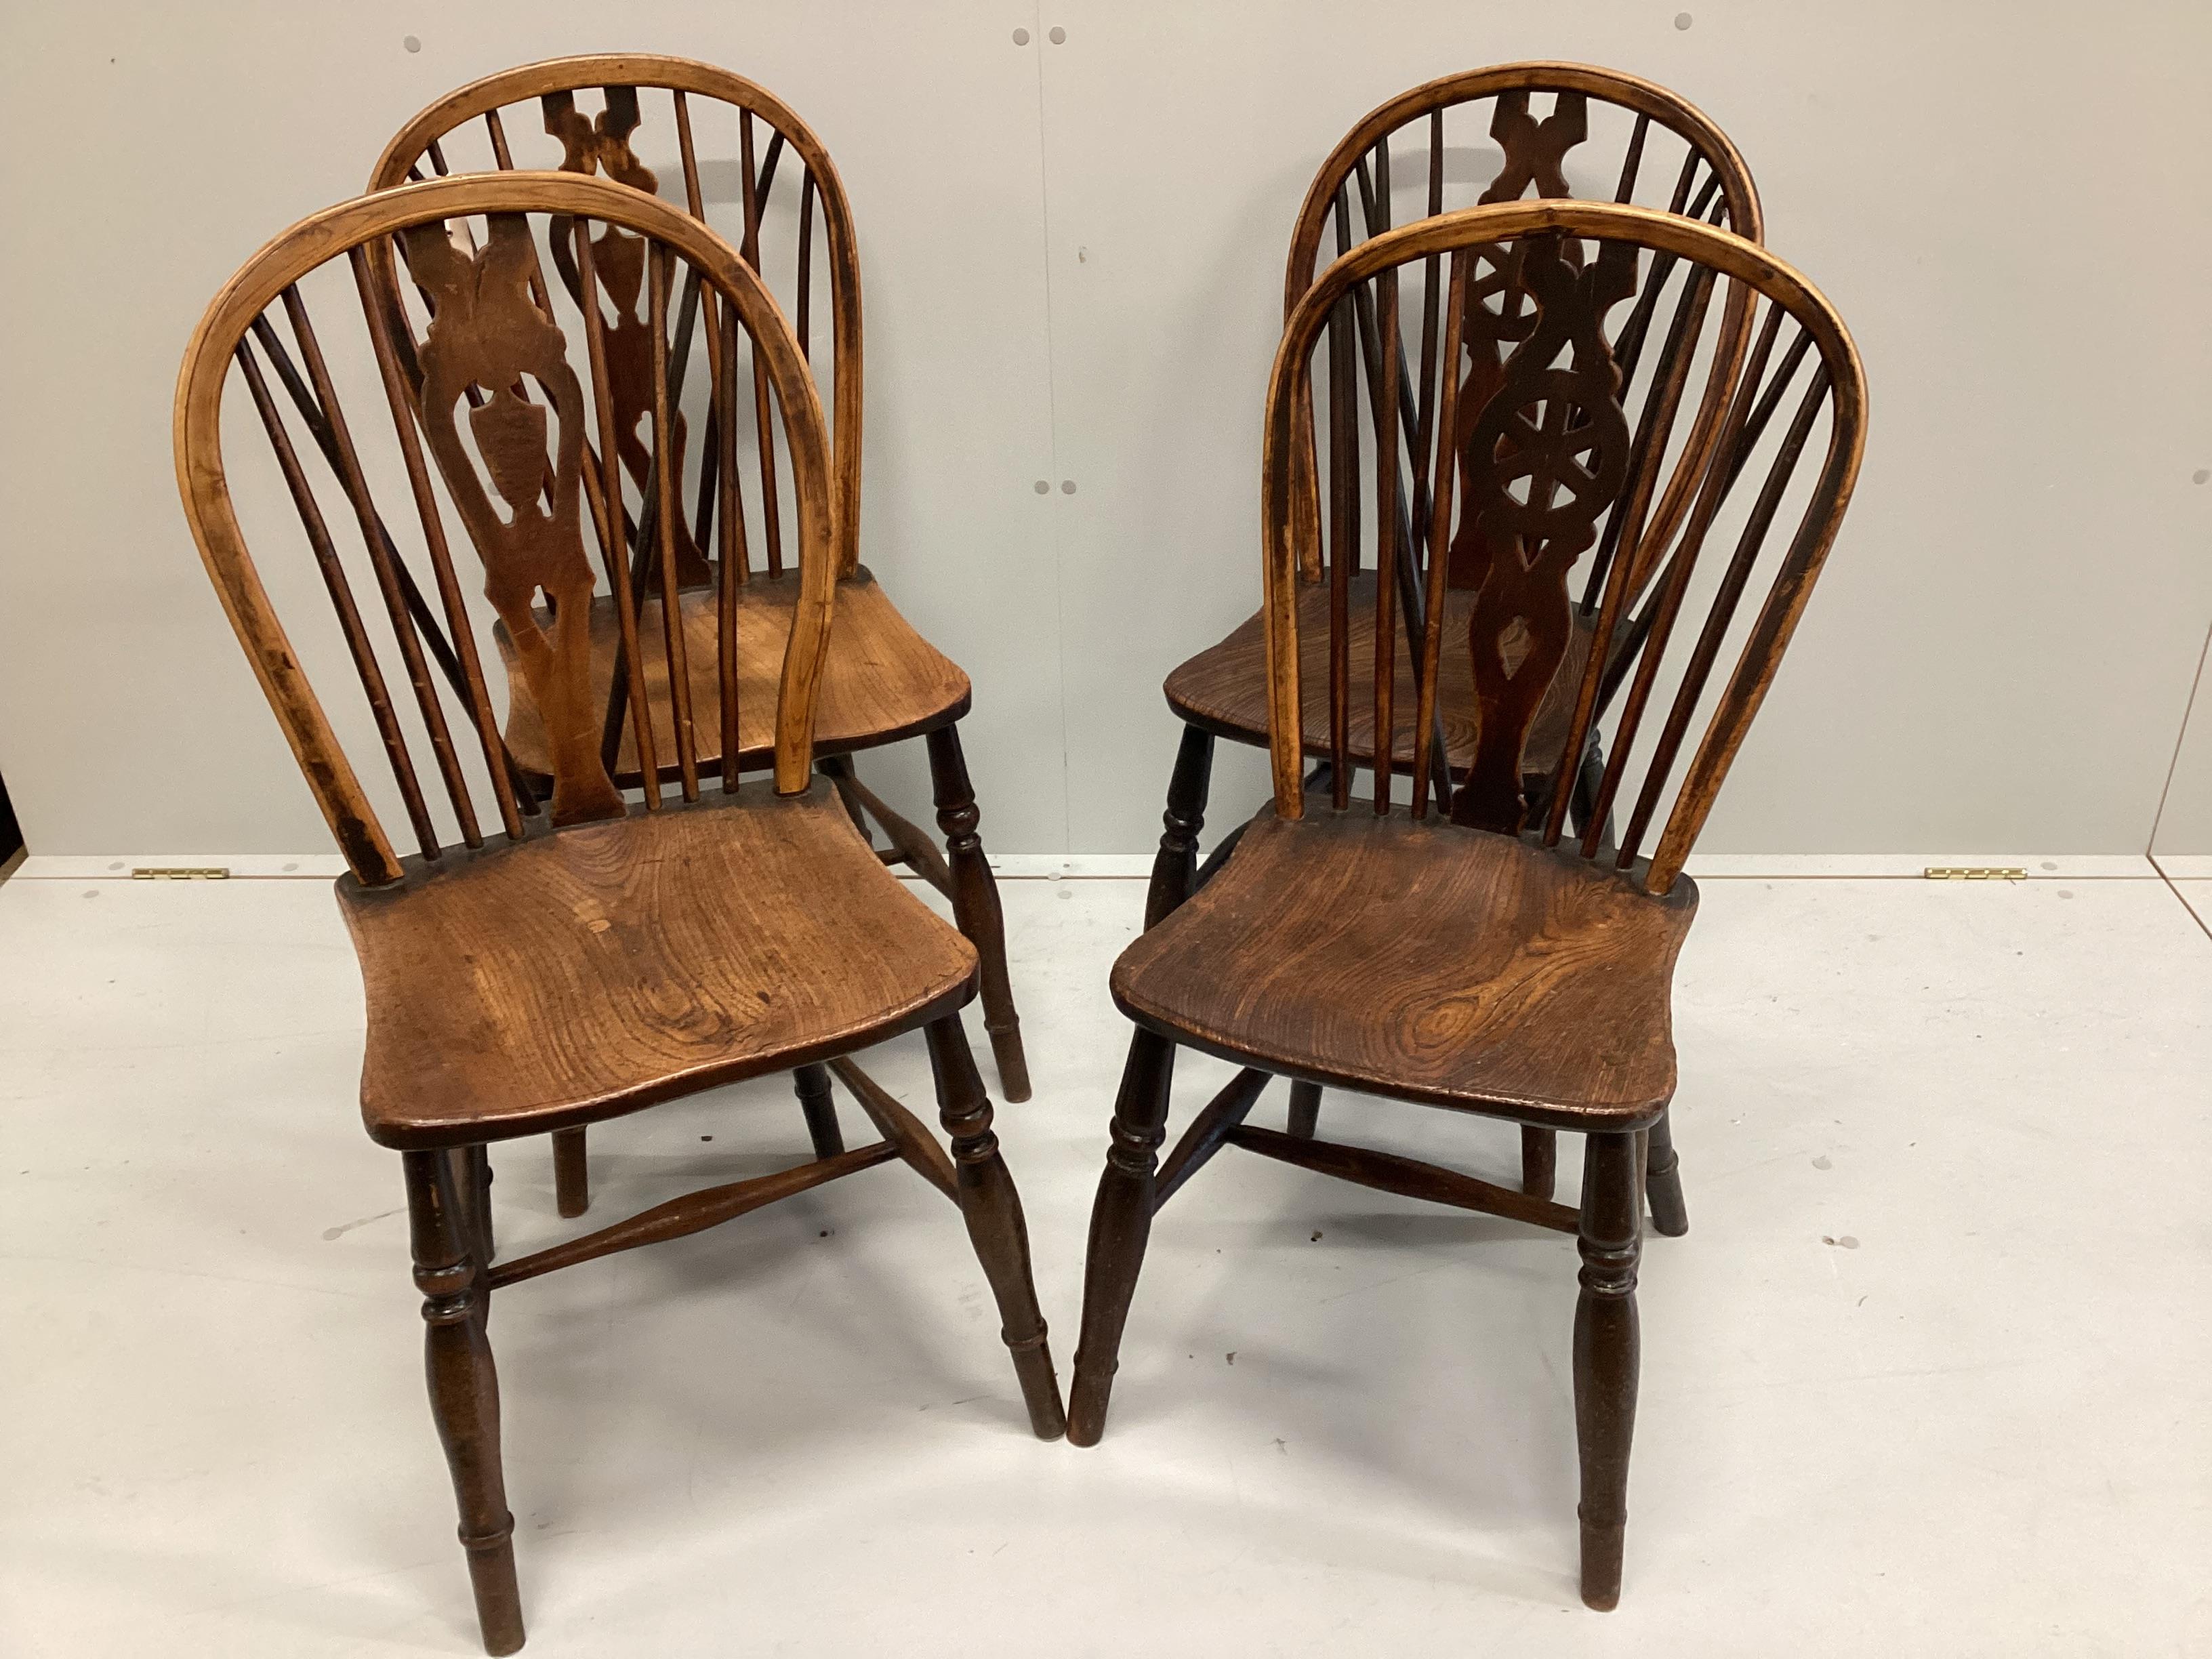 A harlequin set of four 19th century ash, elm and beech Windsor chairs